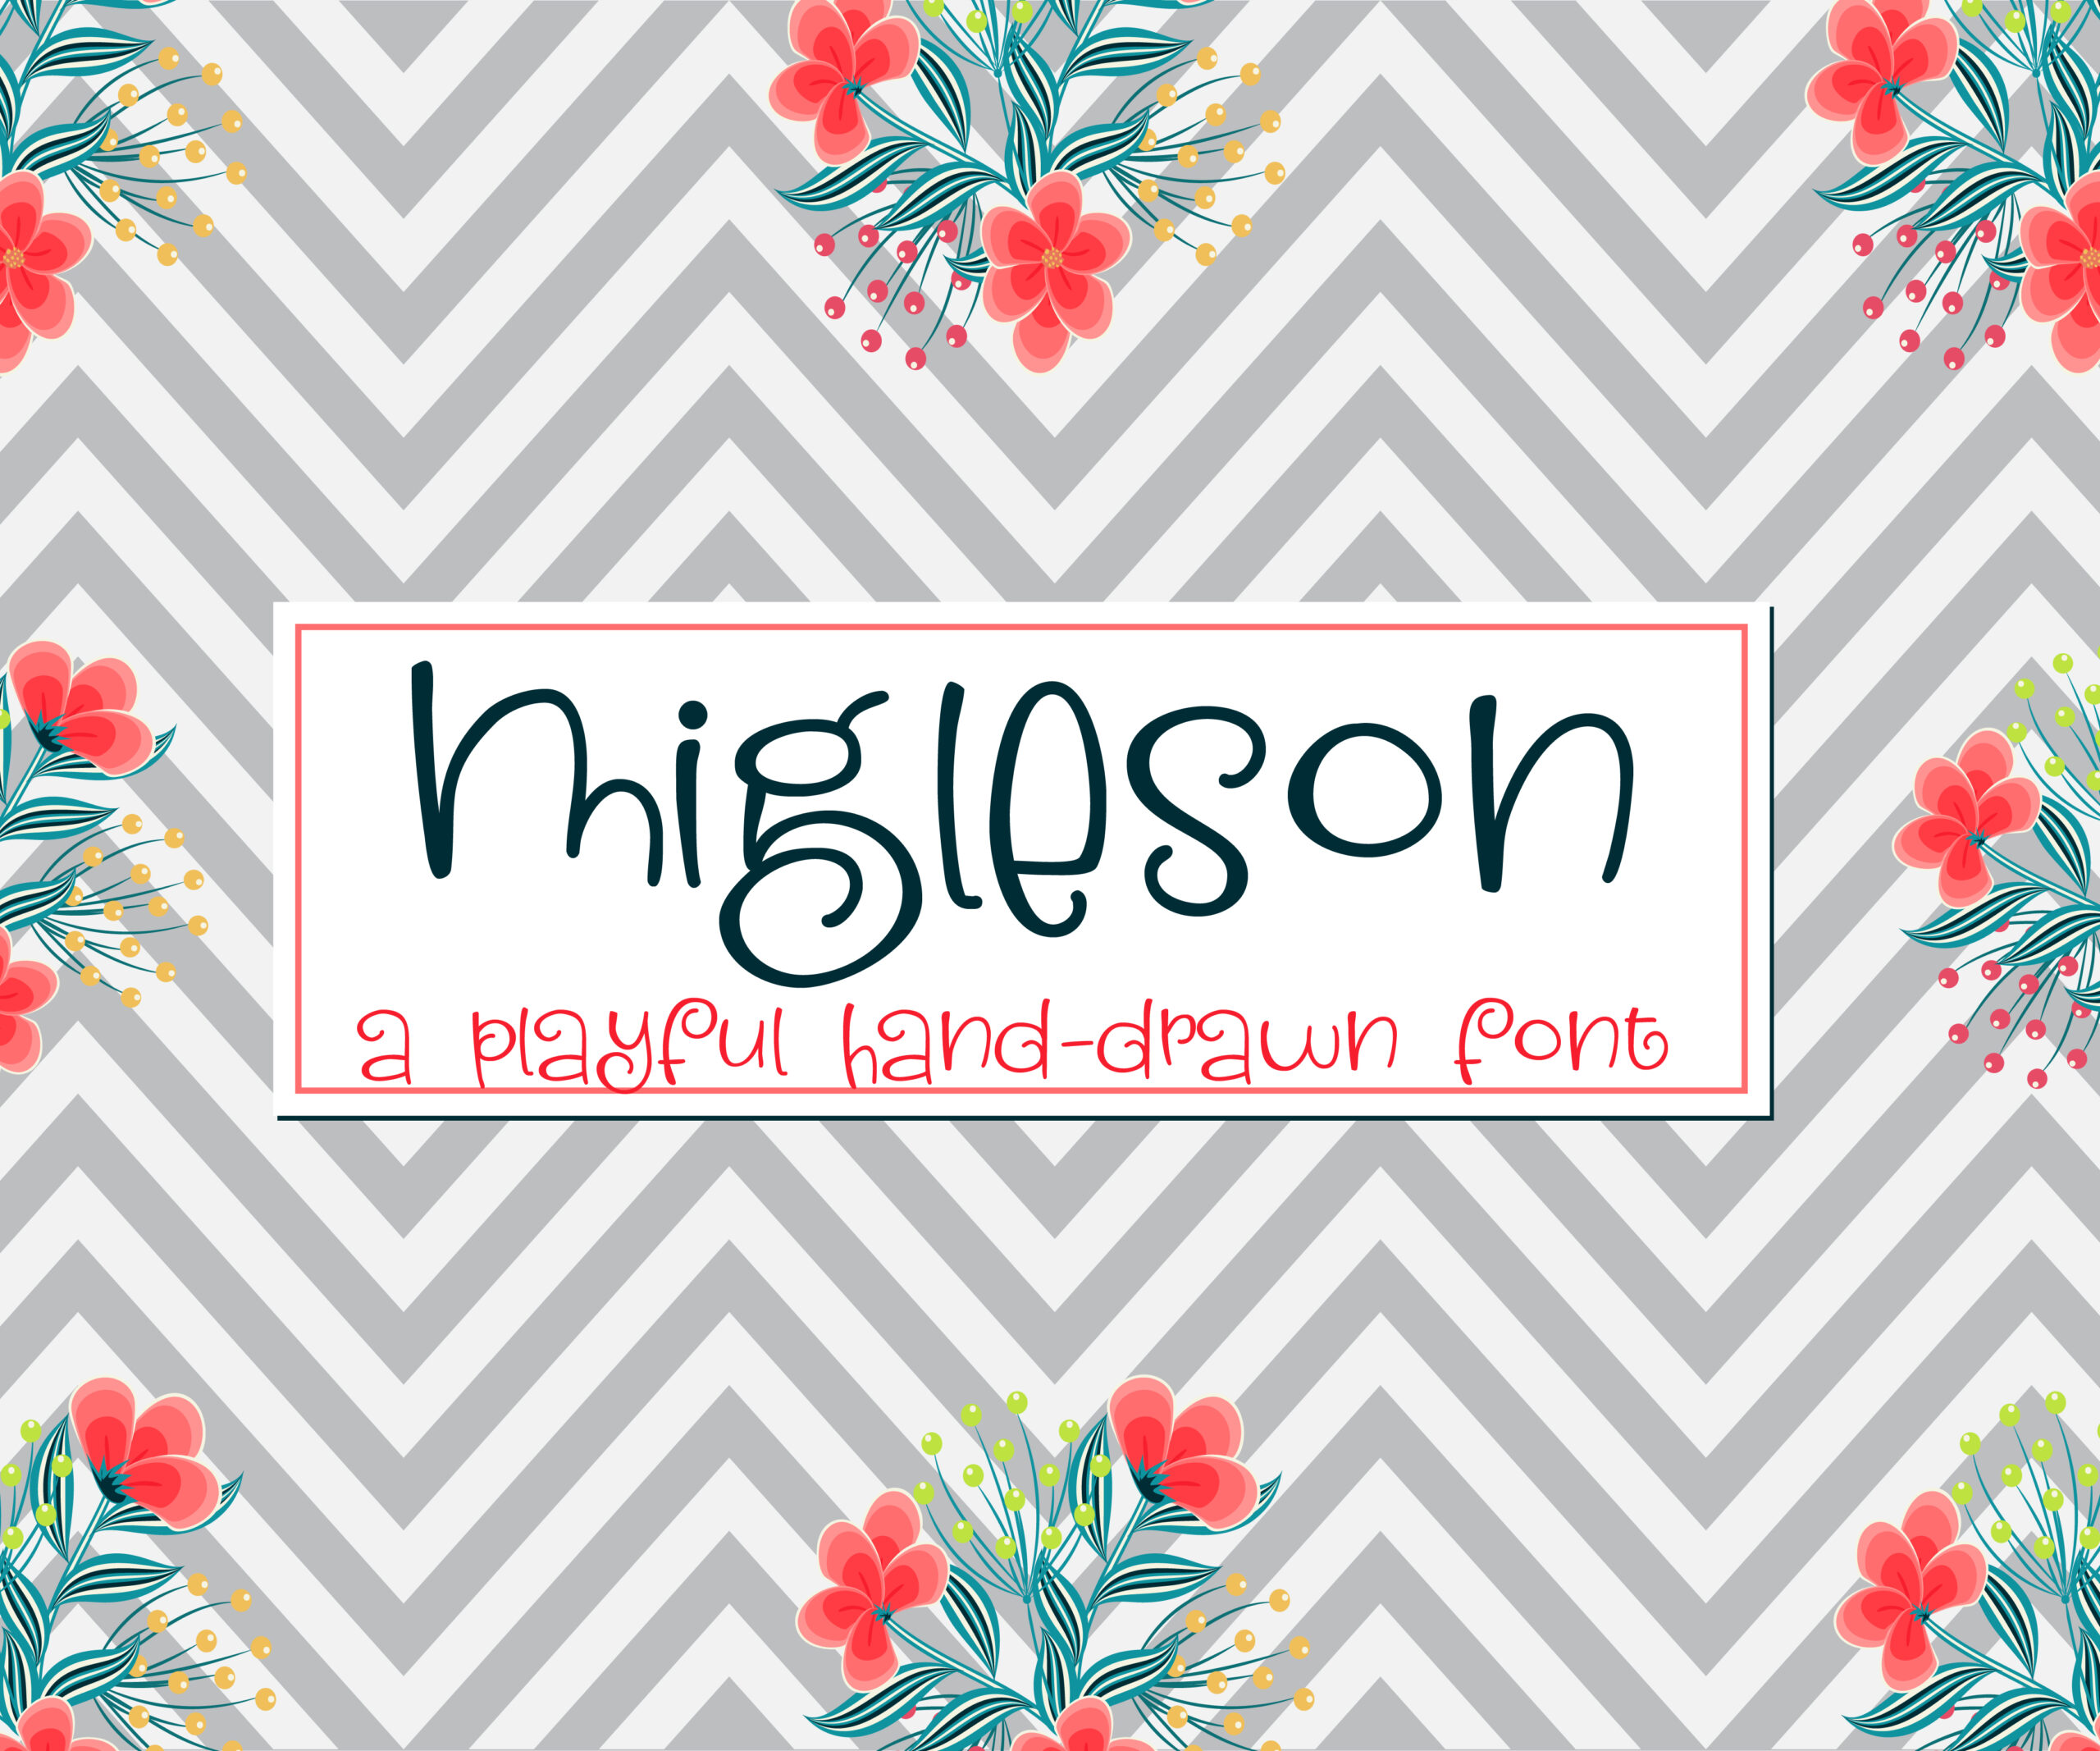 Migelson Font Poster 1